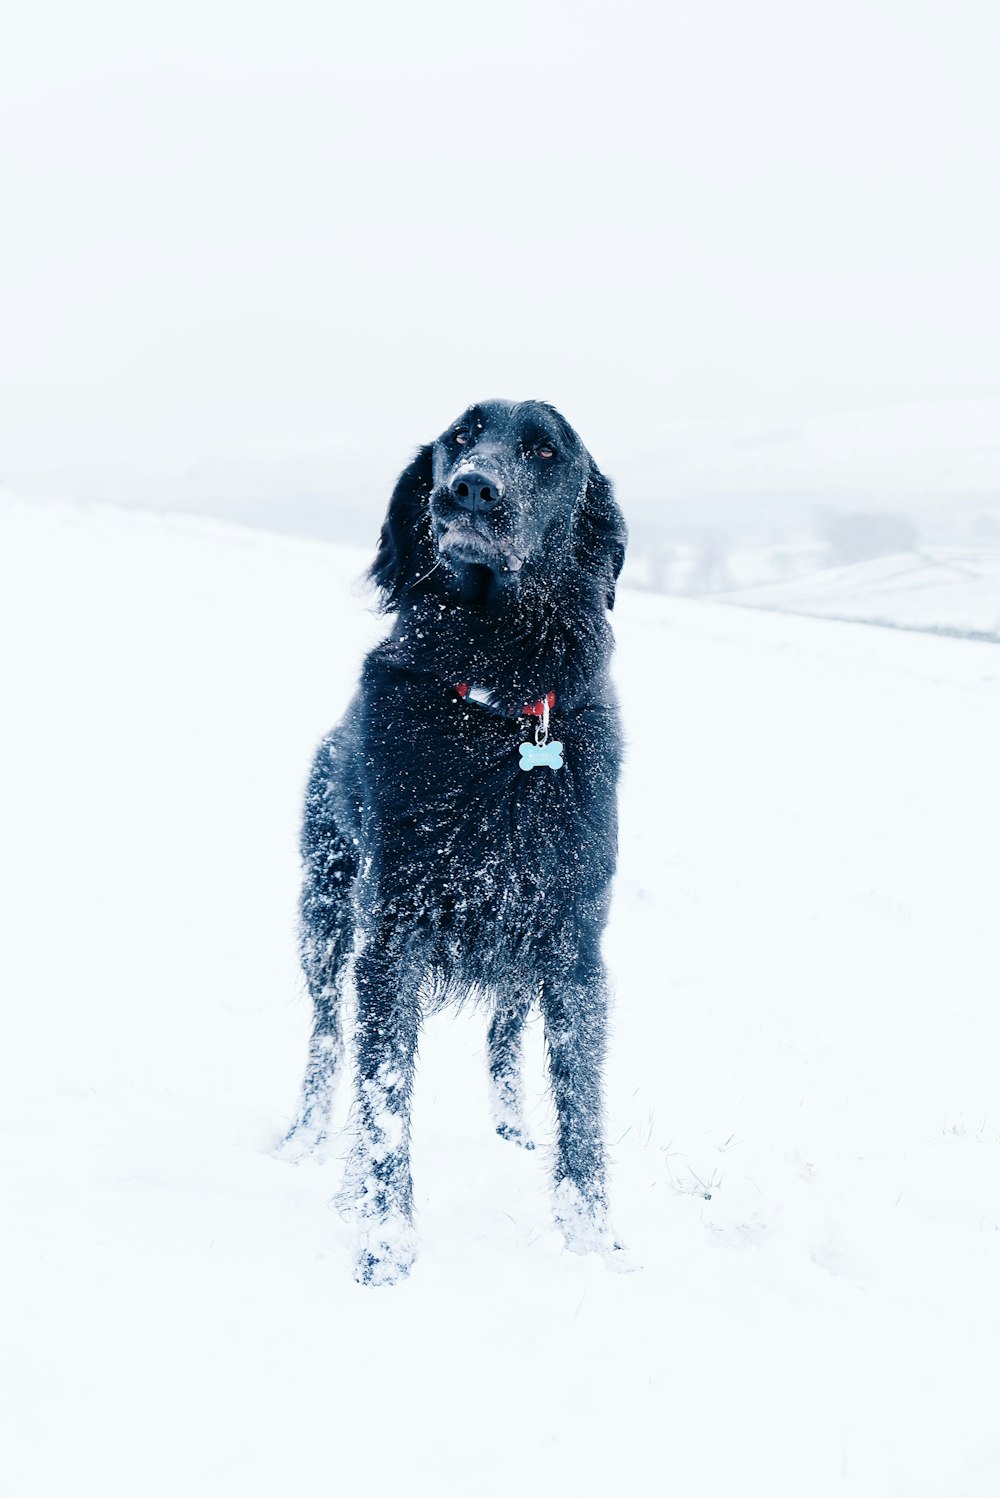 long-coated black dog standing on snow field